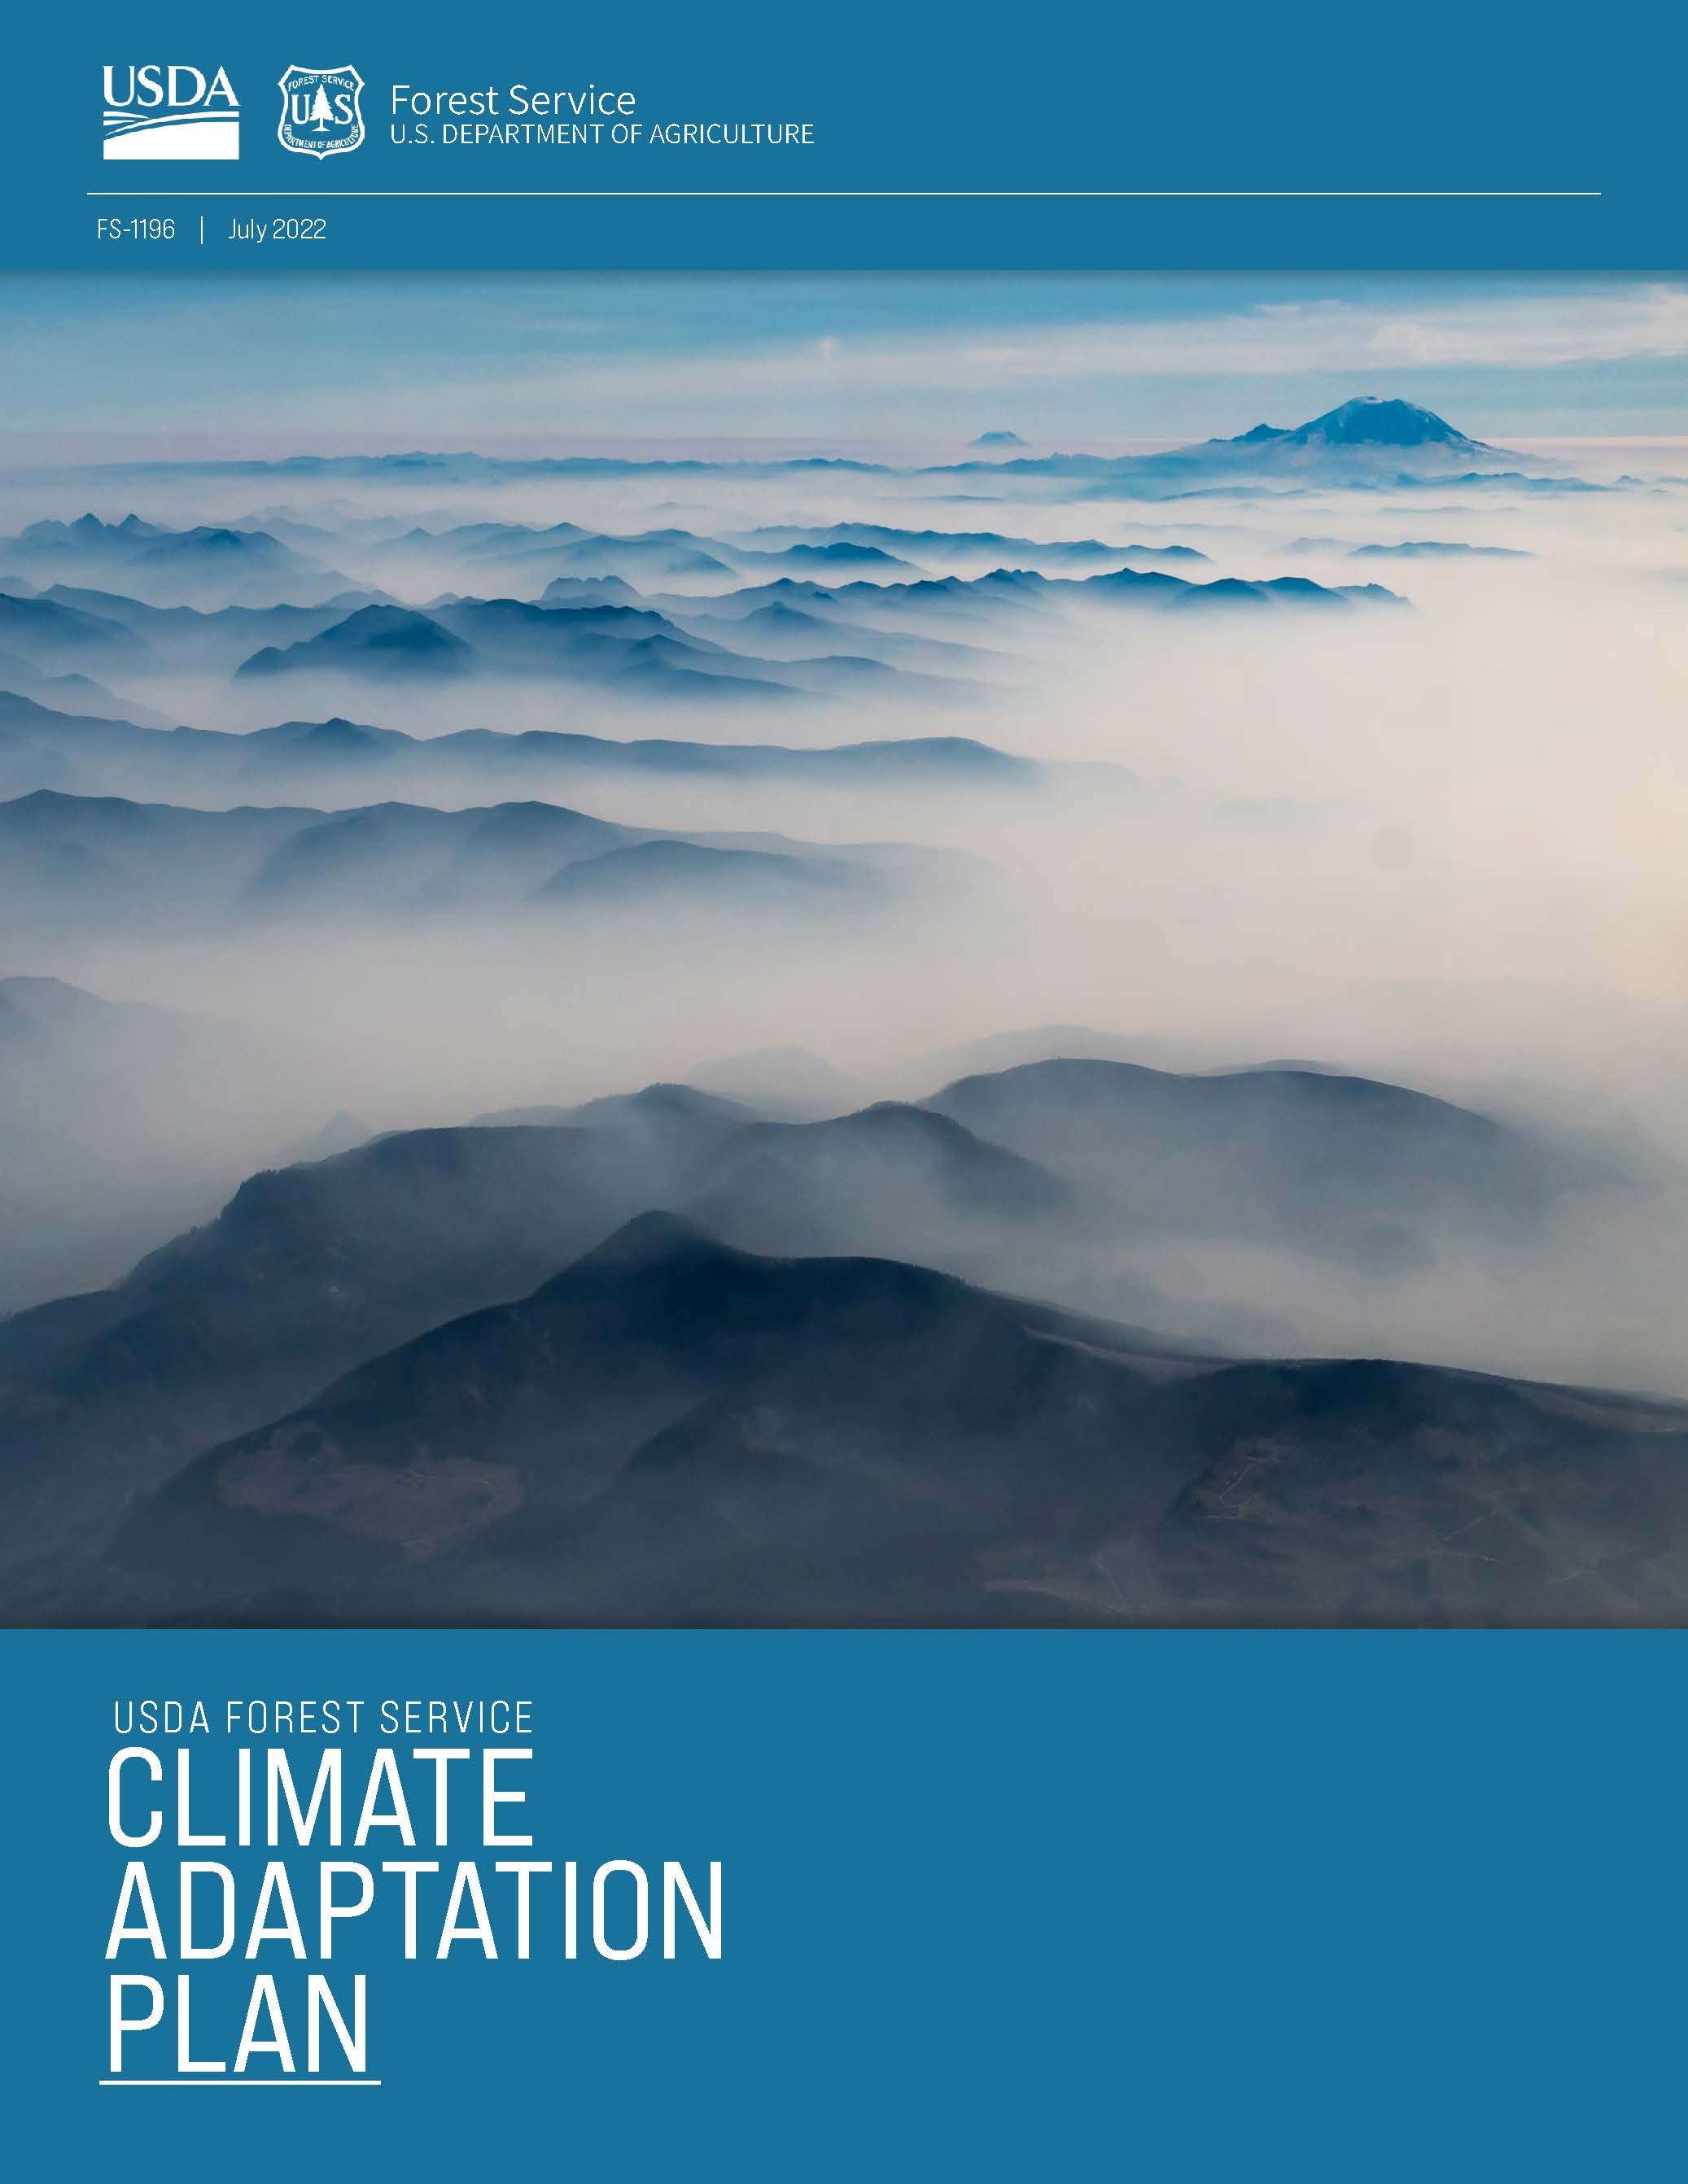 Cover page for the 2022 FS Action Plan for Climate Adaptation and Resilience, aerial view of cloud shrouded mountains.